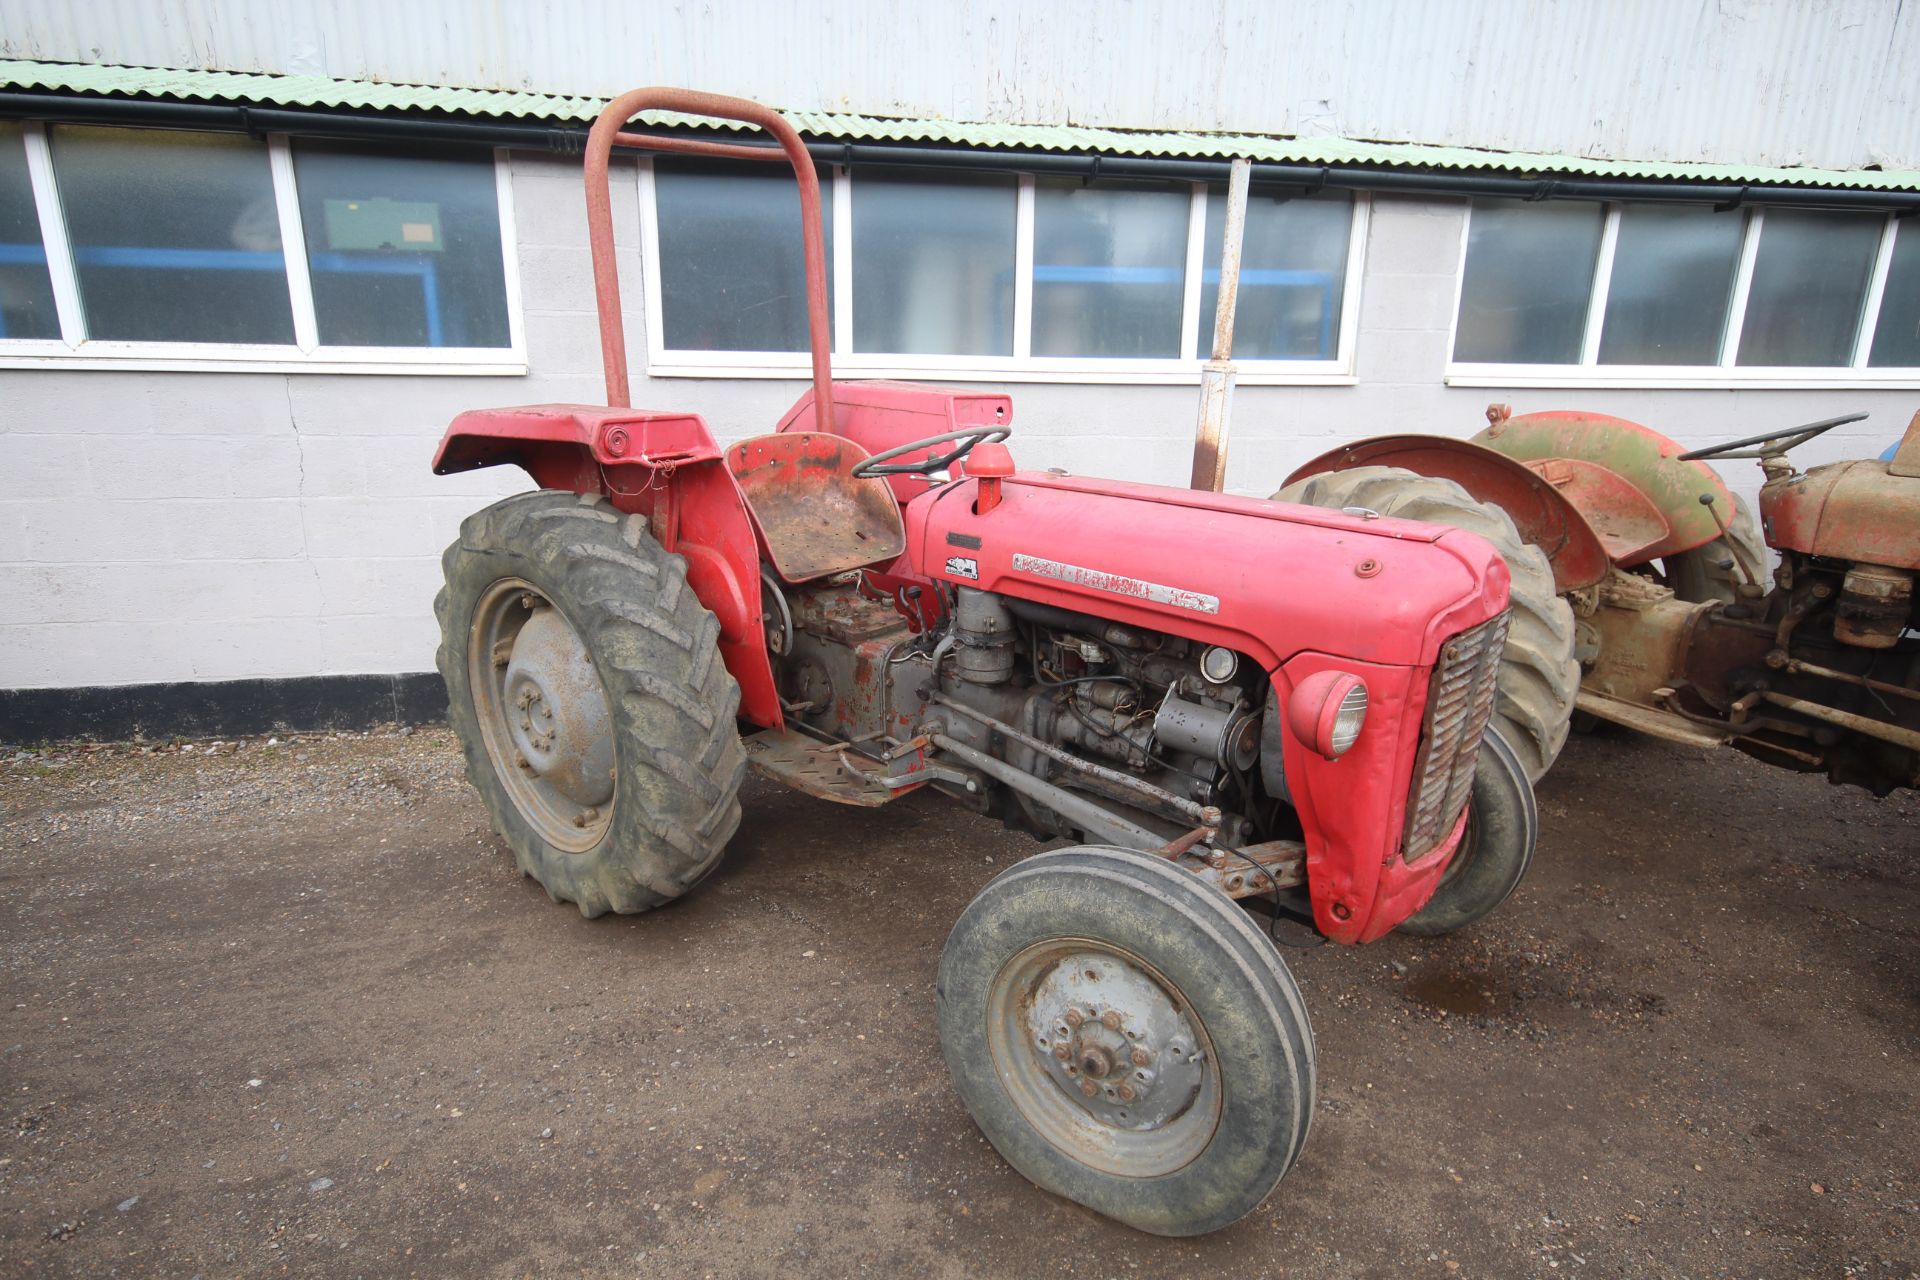 Massey Ferguson 35X 2WD tractor. 1963. Serial number SNMY313859. 11-28 rear wheels and tyres.